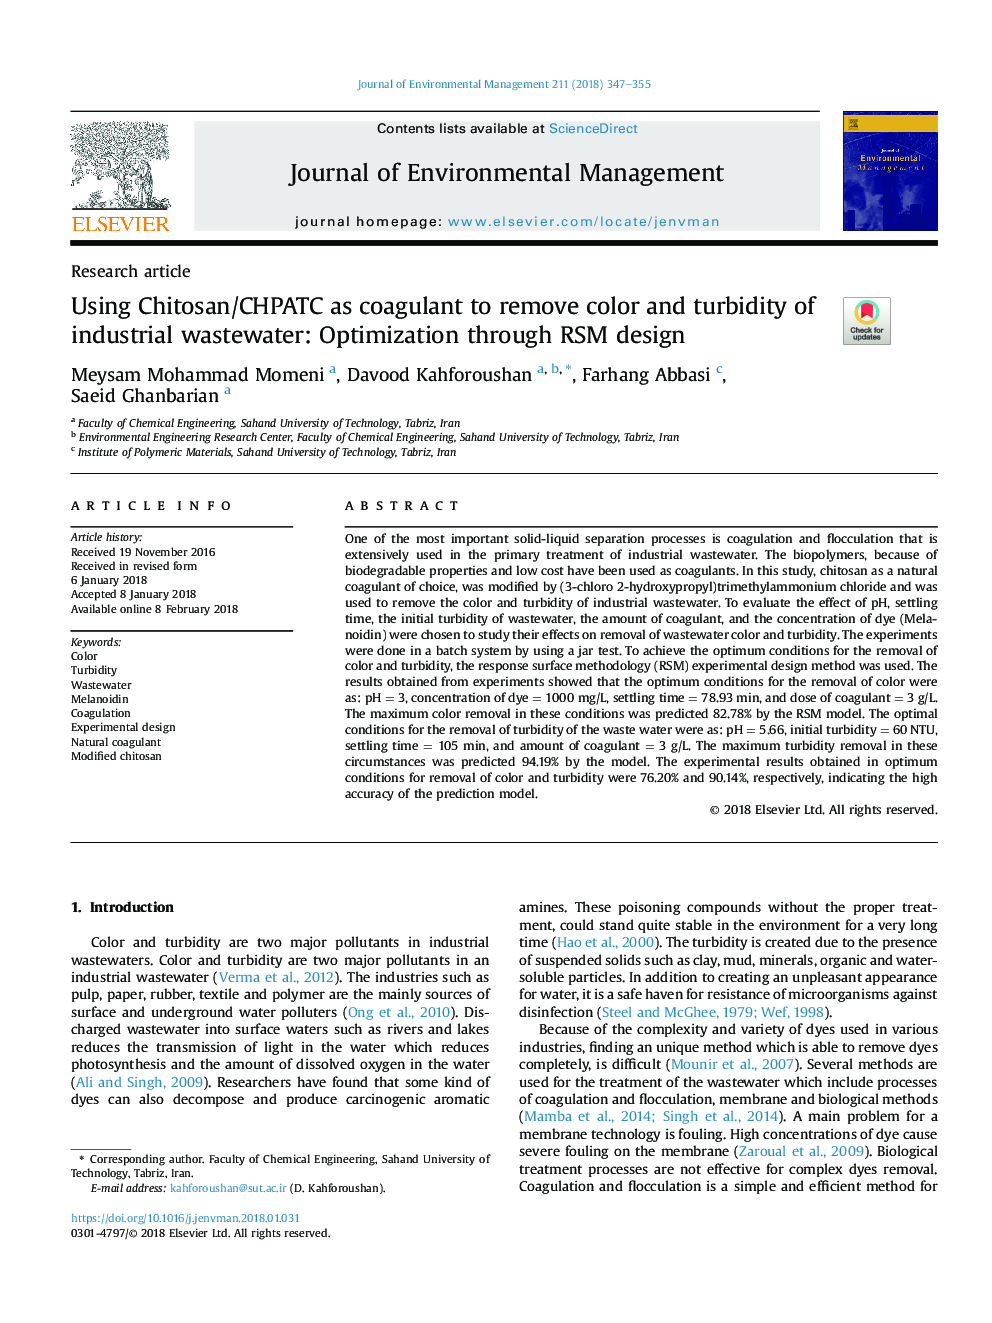 Using Chitosan/CHPATC as coagulant to remove color and turbidity of industrial wastewater: Optimization through RSM design